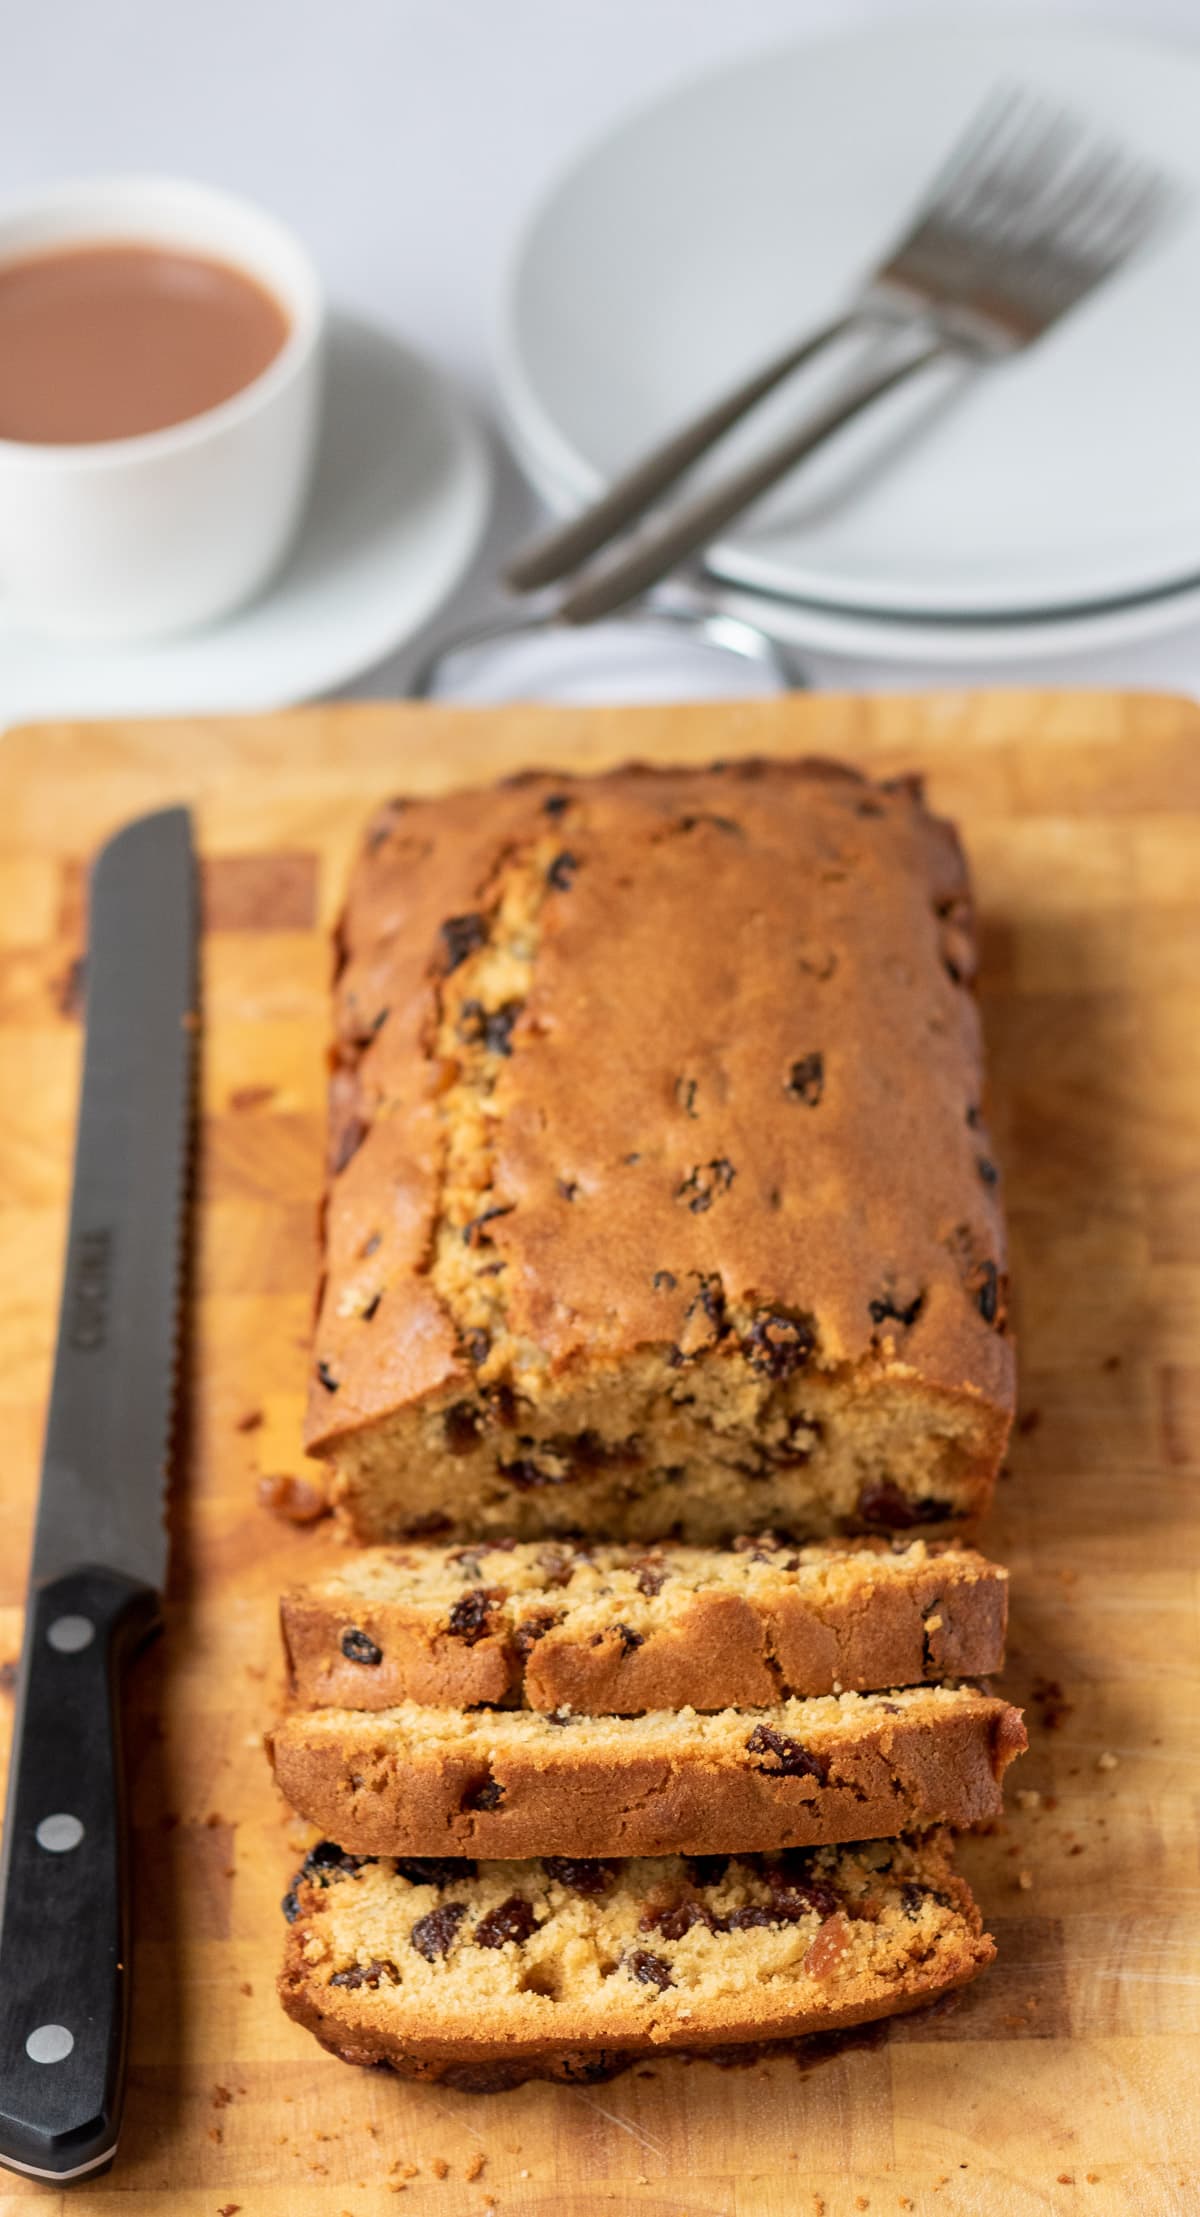 Fruit loaf cake on a chopping board. Three slices cut off the front. Cup of tea and serving plates behind.